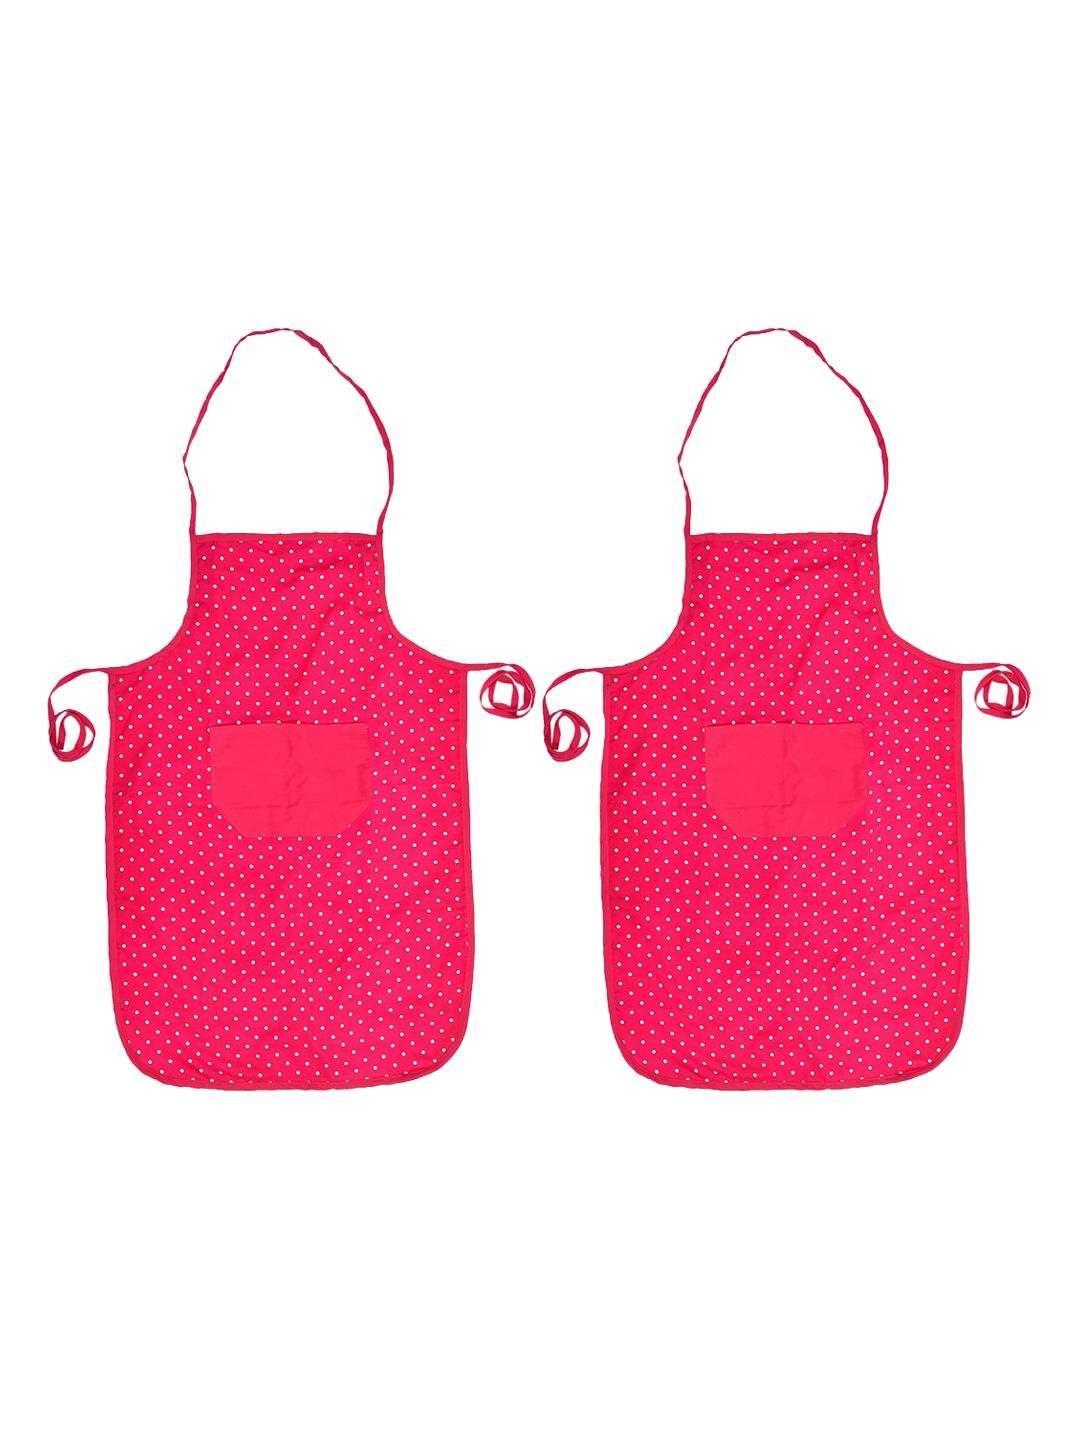 Kuber Industries Set of 2 Pink Dot Printed Cotton Aprons Price in India